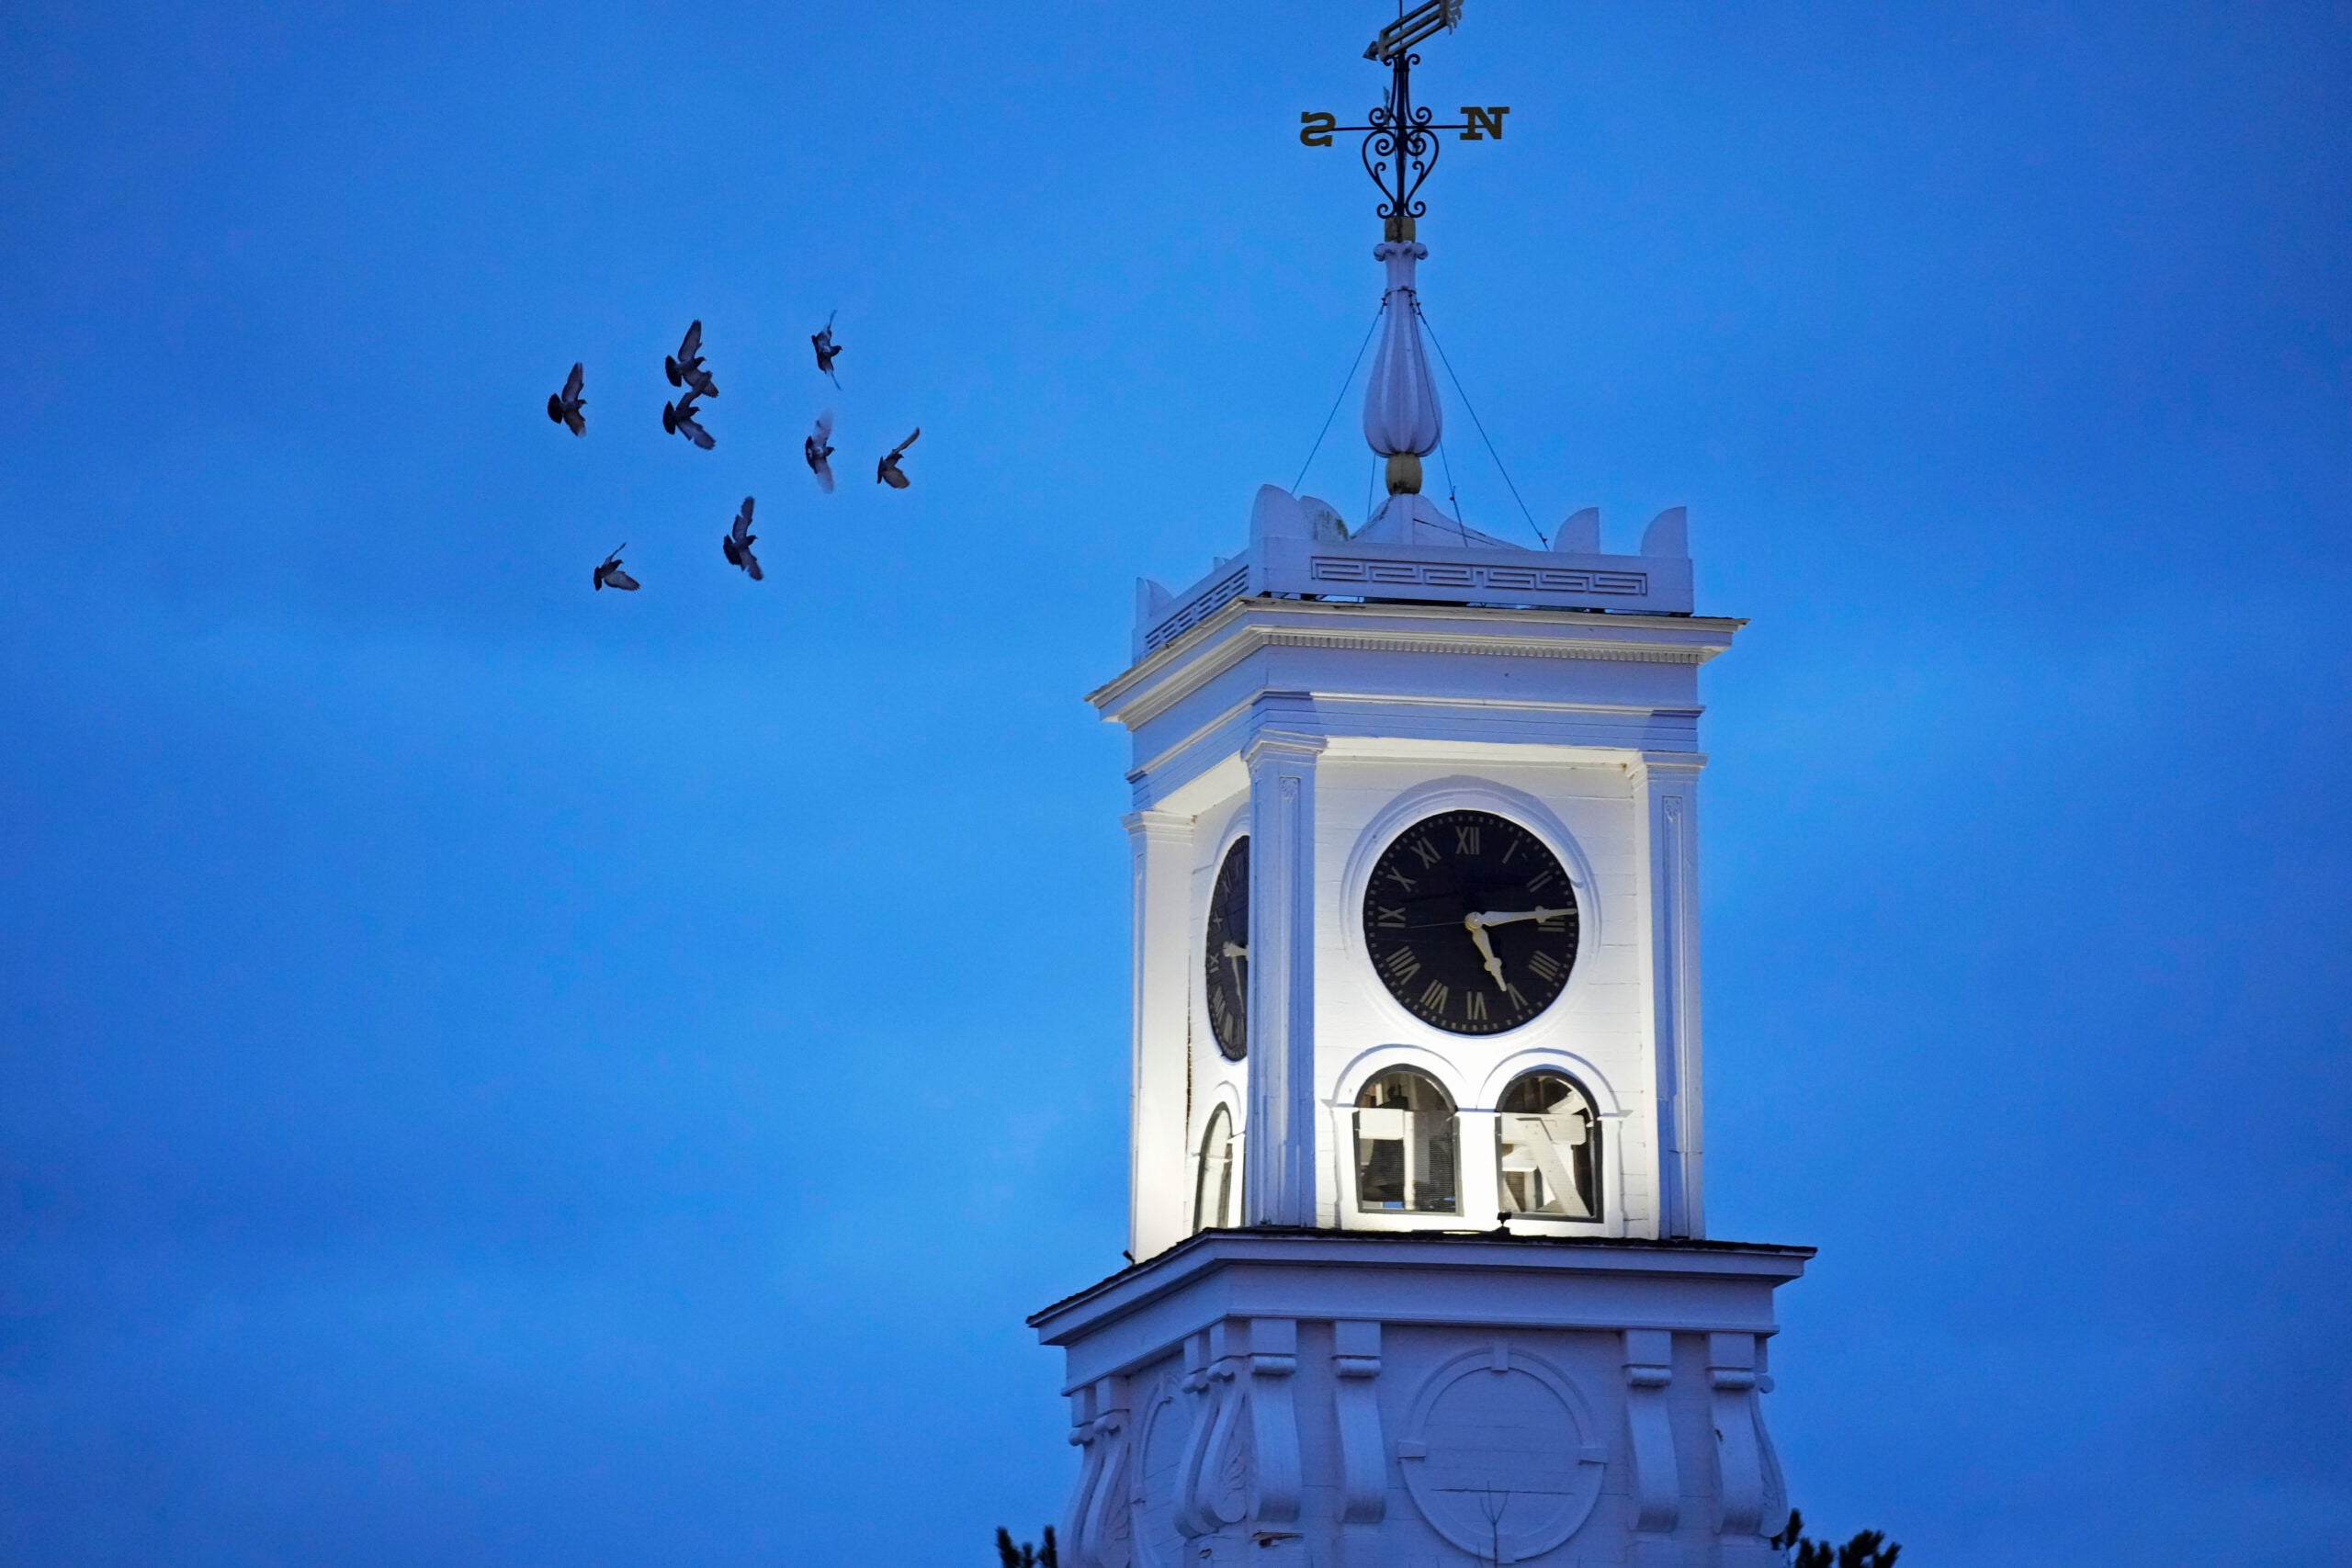 Pigeons circle a church tower in Columbia Falls, Maine.